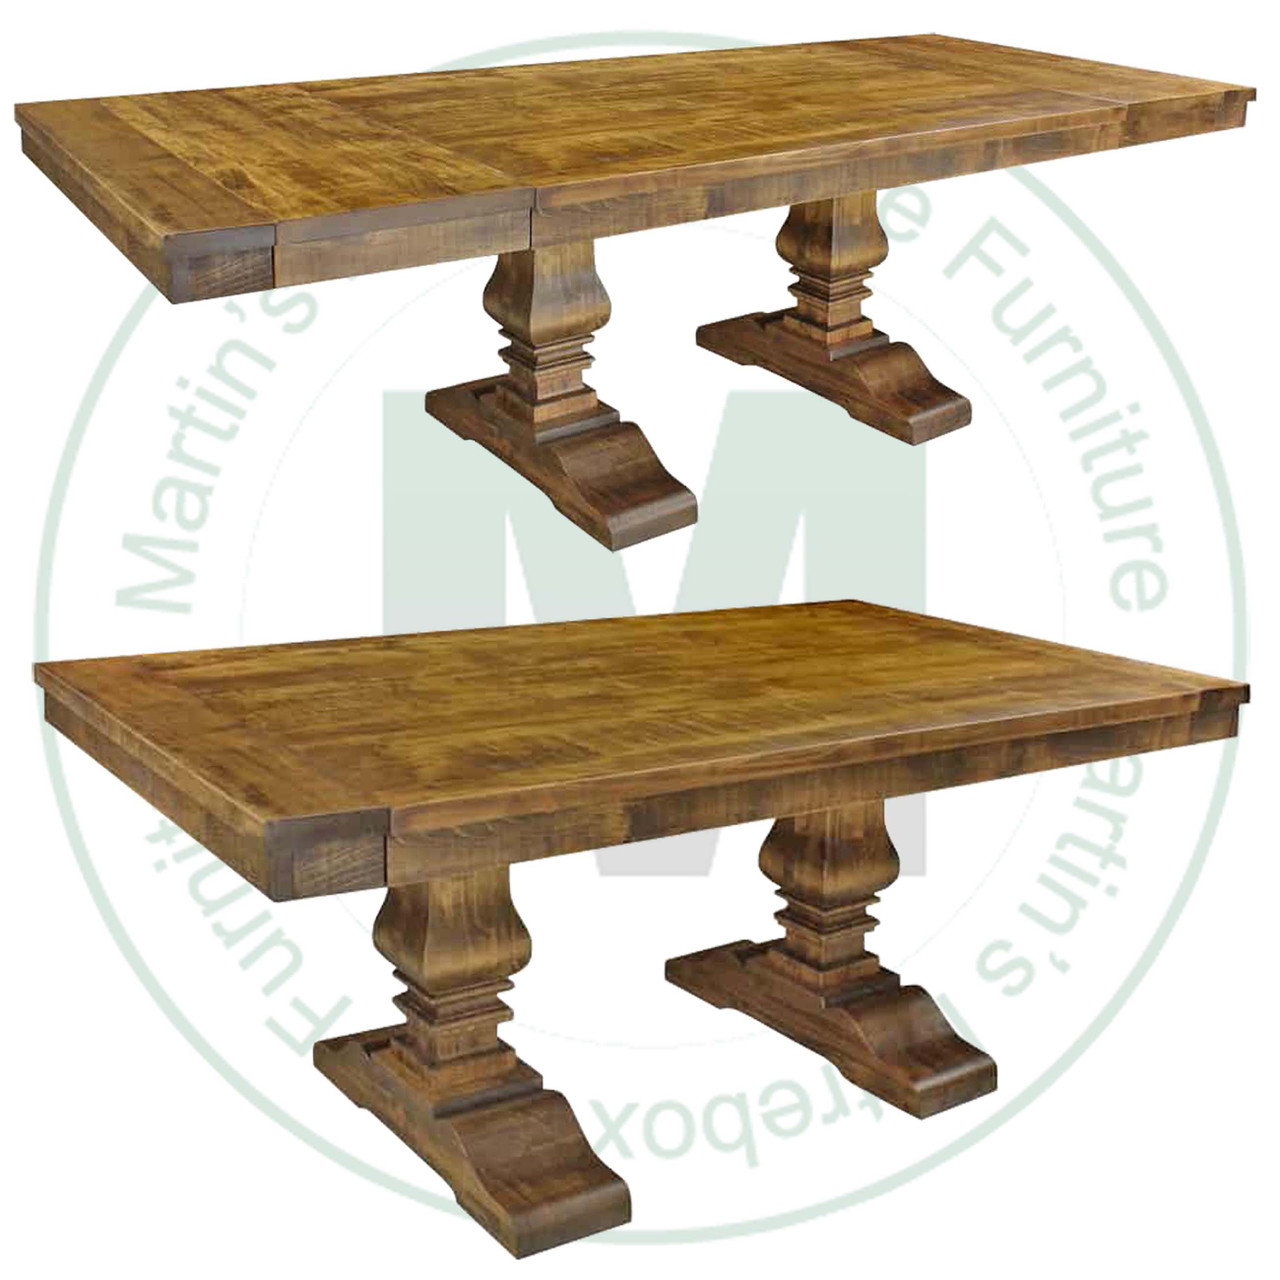 Wormy Maple Century Solid Top Double Pedestal Table 48''D x 84''W x 30''H With 2 - 16'' Leaves